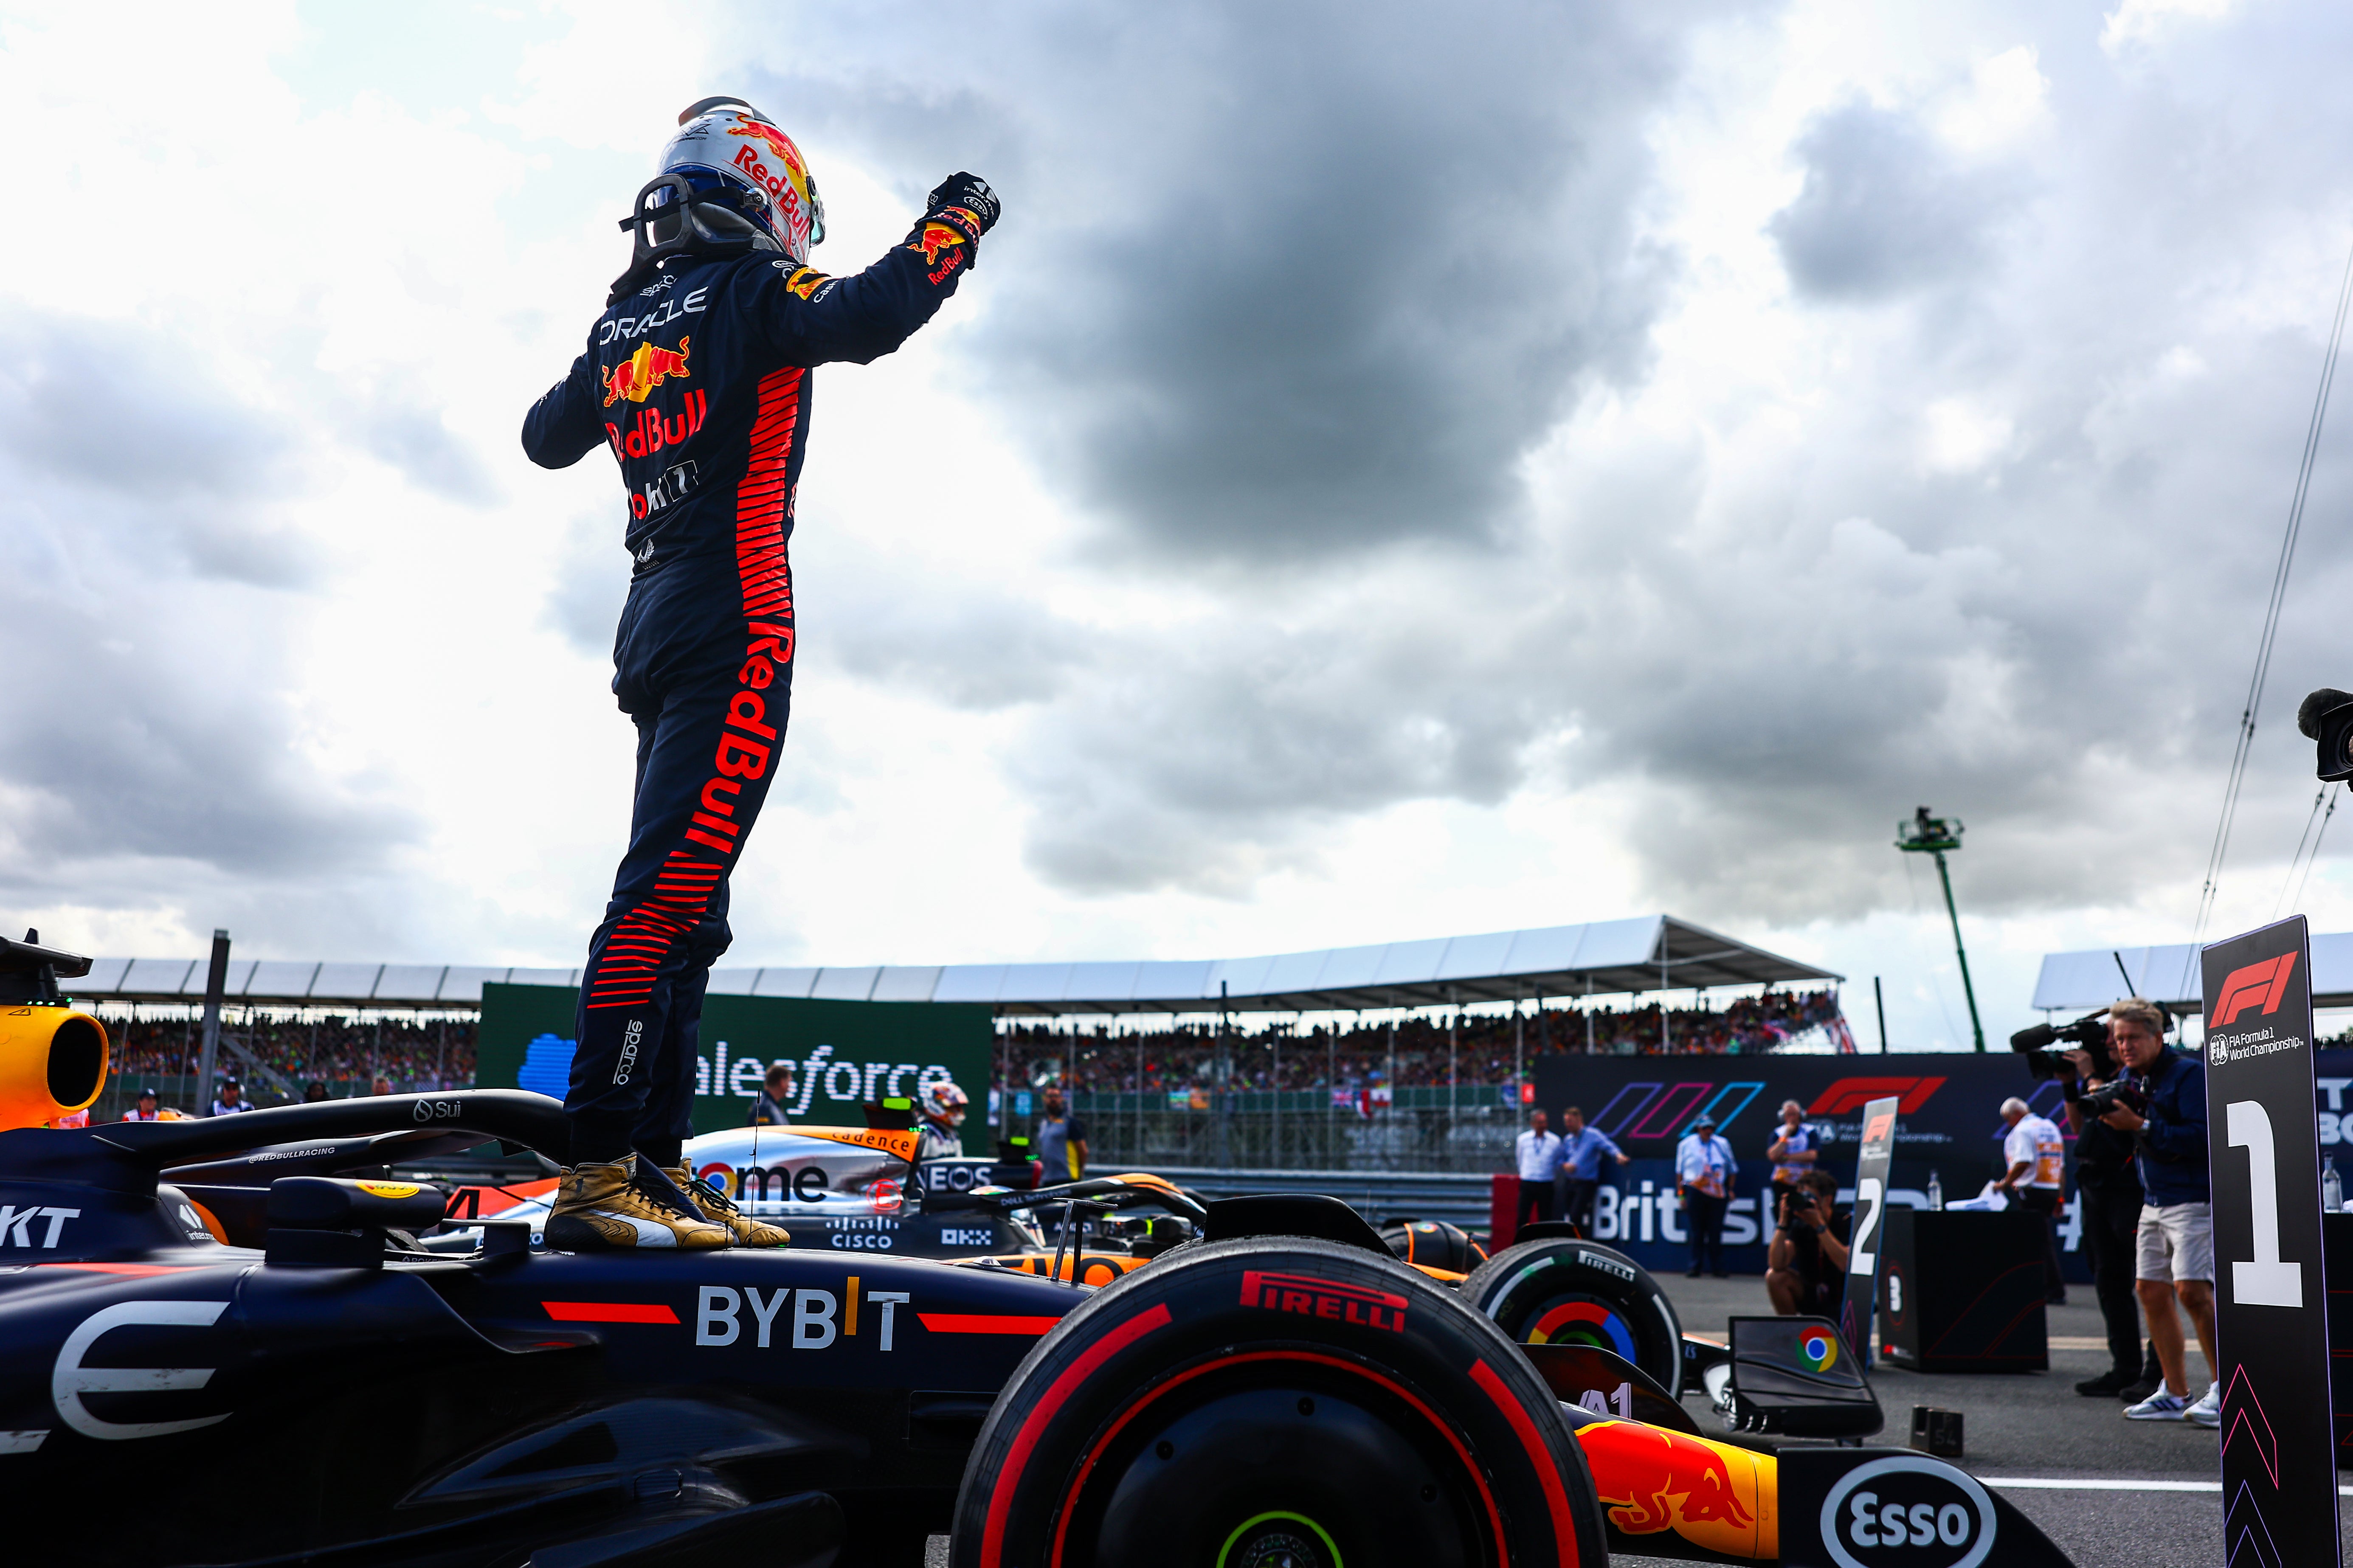 Verstappen quickly regained the lead and kept first place for his sixth win in a row